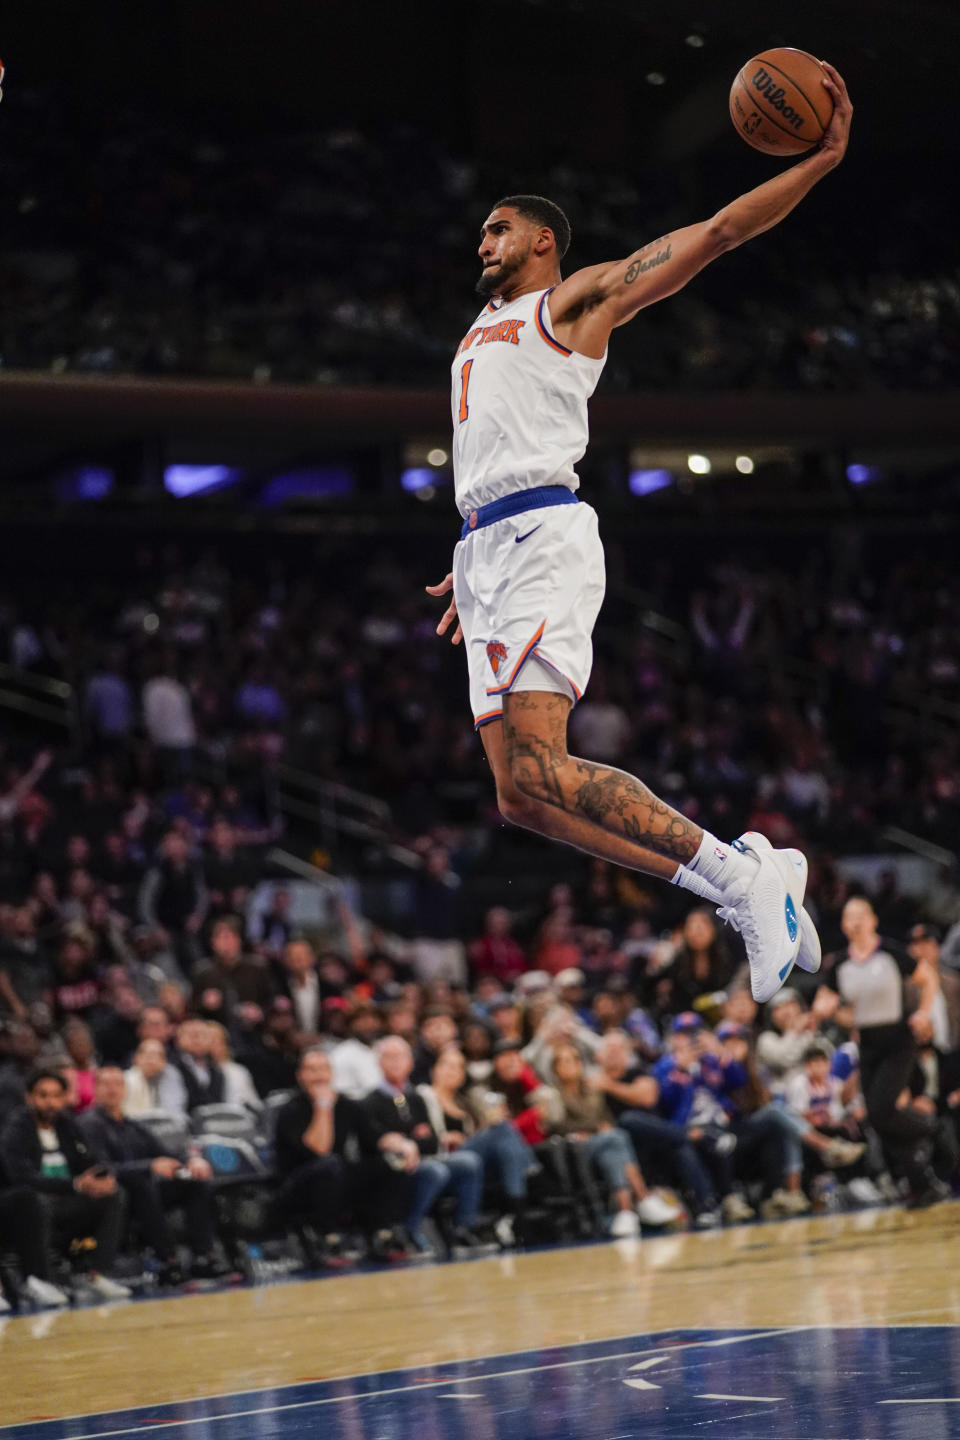 New York Knicks forward Obi Toppin leaps to dunk against the Indiana Pacers during the second half of a preseason NBA basketball game Friday, Oct. 7, 2022, in New York. (AP Photo/Eduardo Munoz Alvarez)